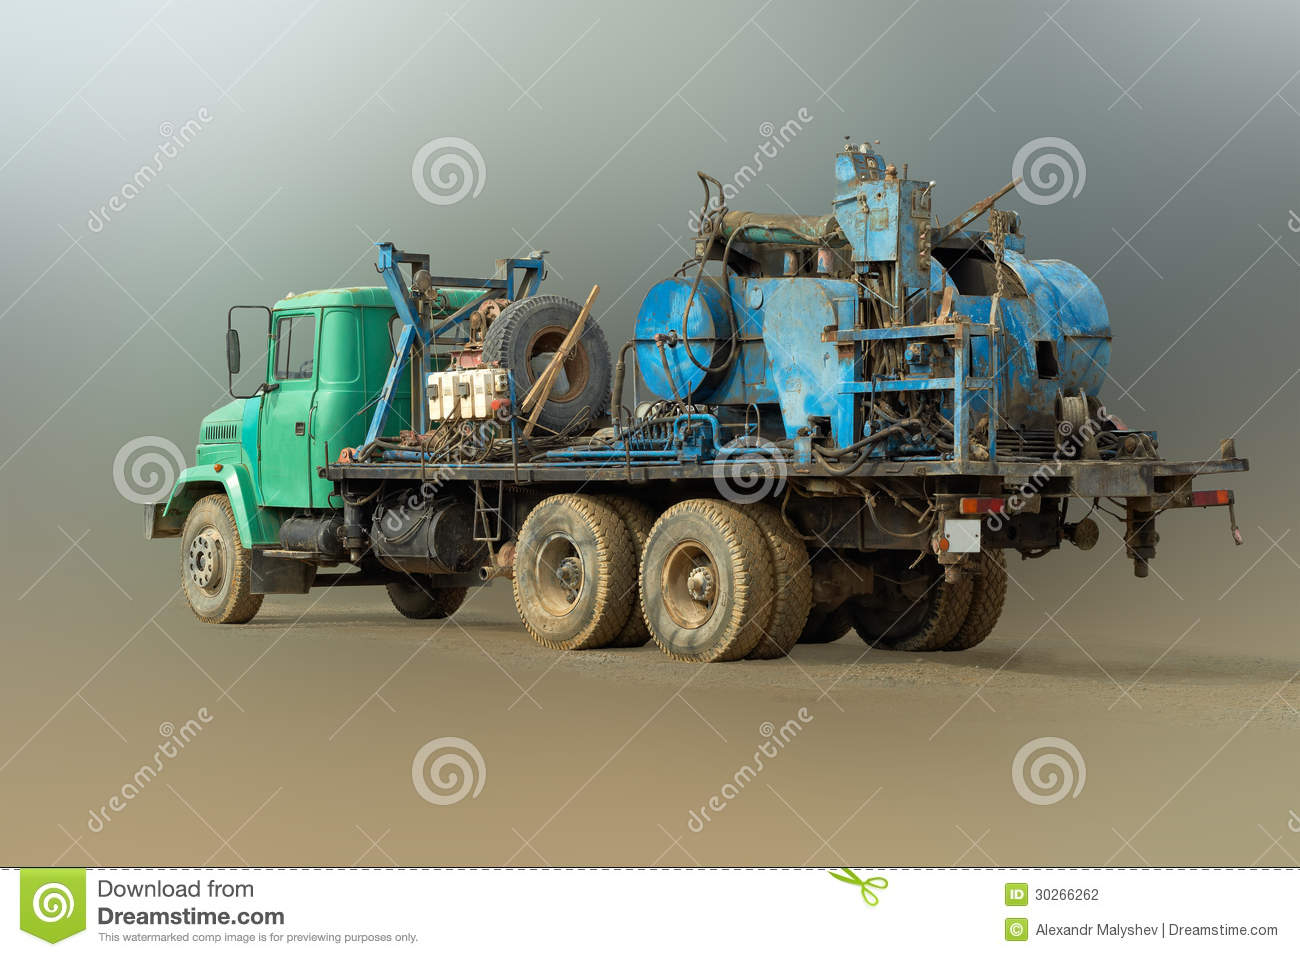 Mobile Drilling Rig  Stock Photography   Image  30266262